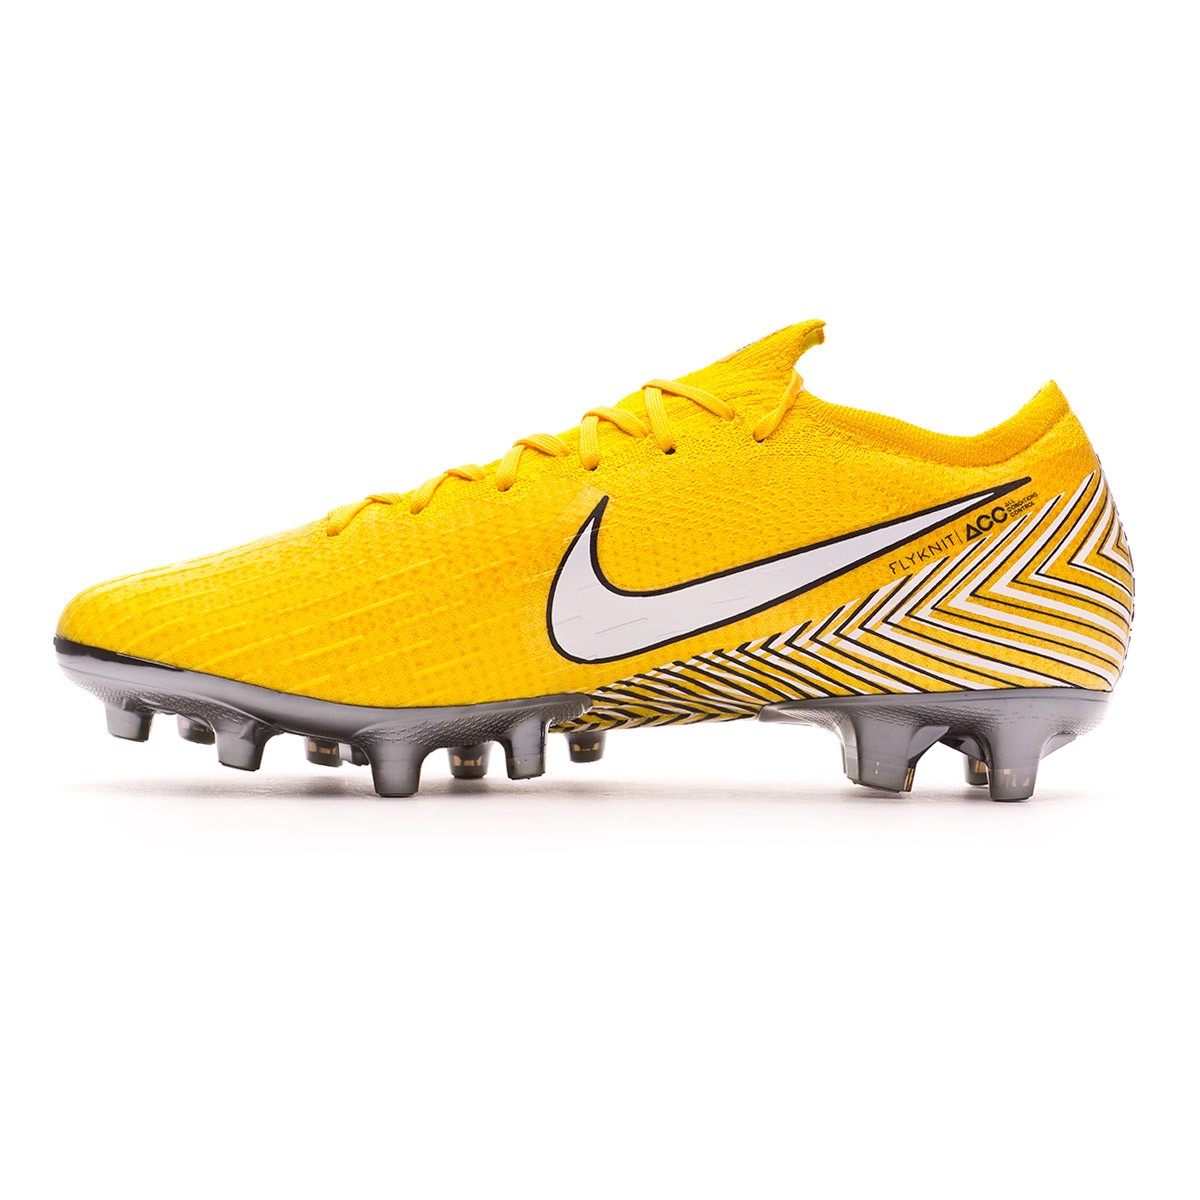 black and yellow nike football boots